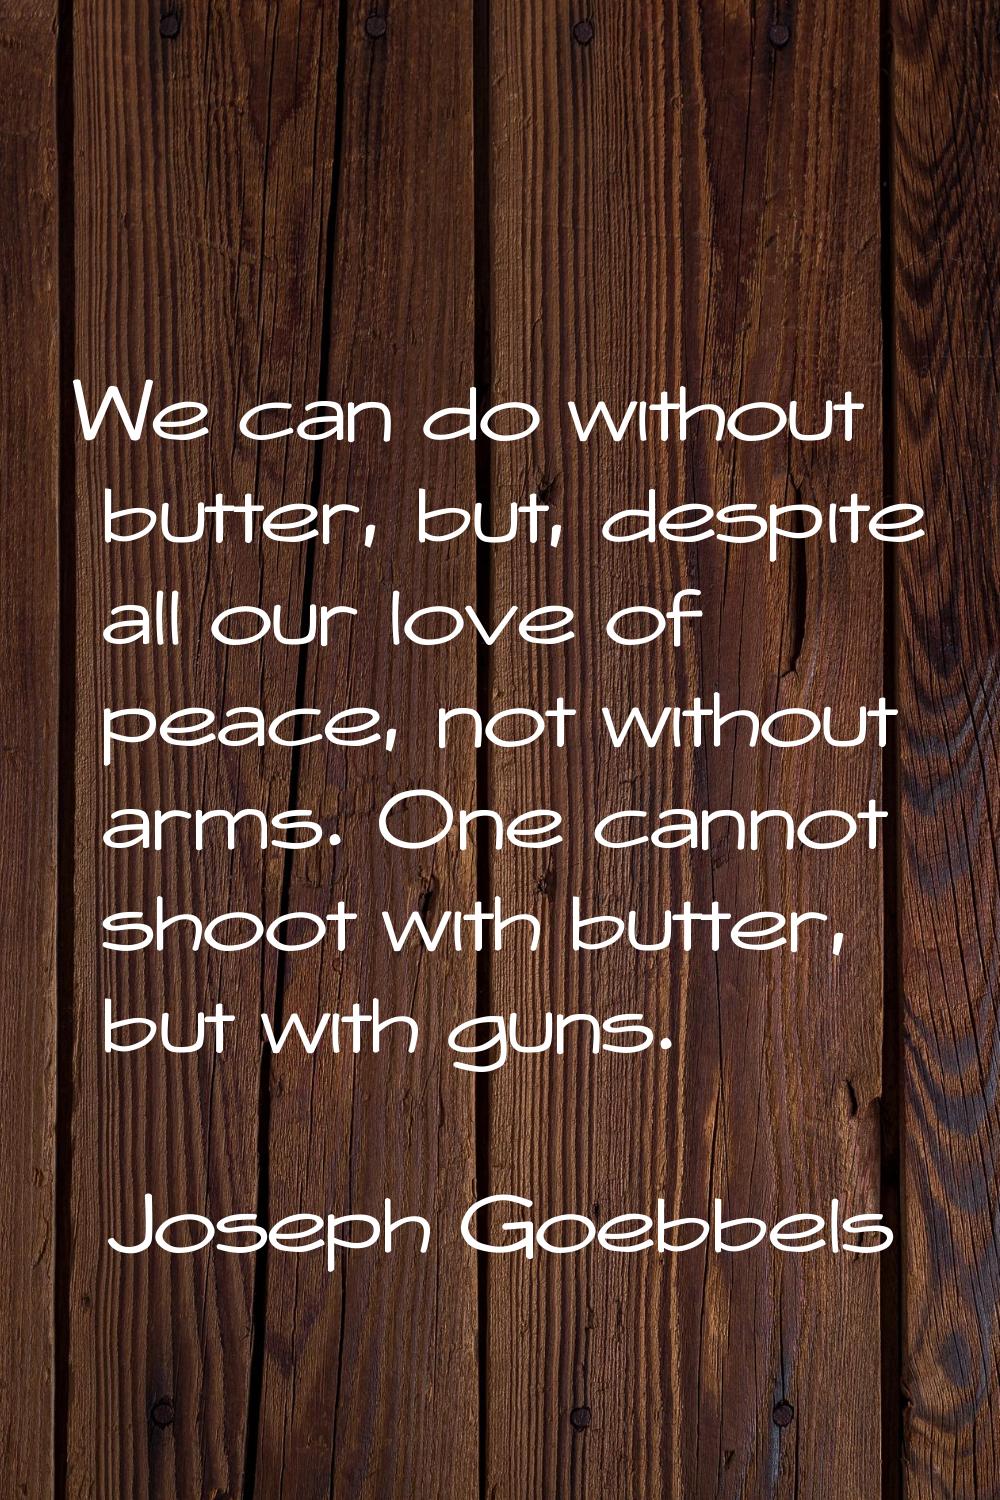 We can do without butter, but, despite all our love of peace, not without arms. One cannot shoot wi